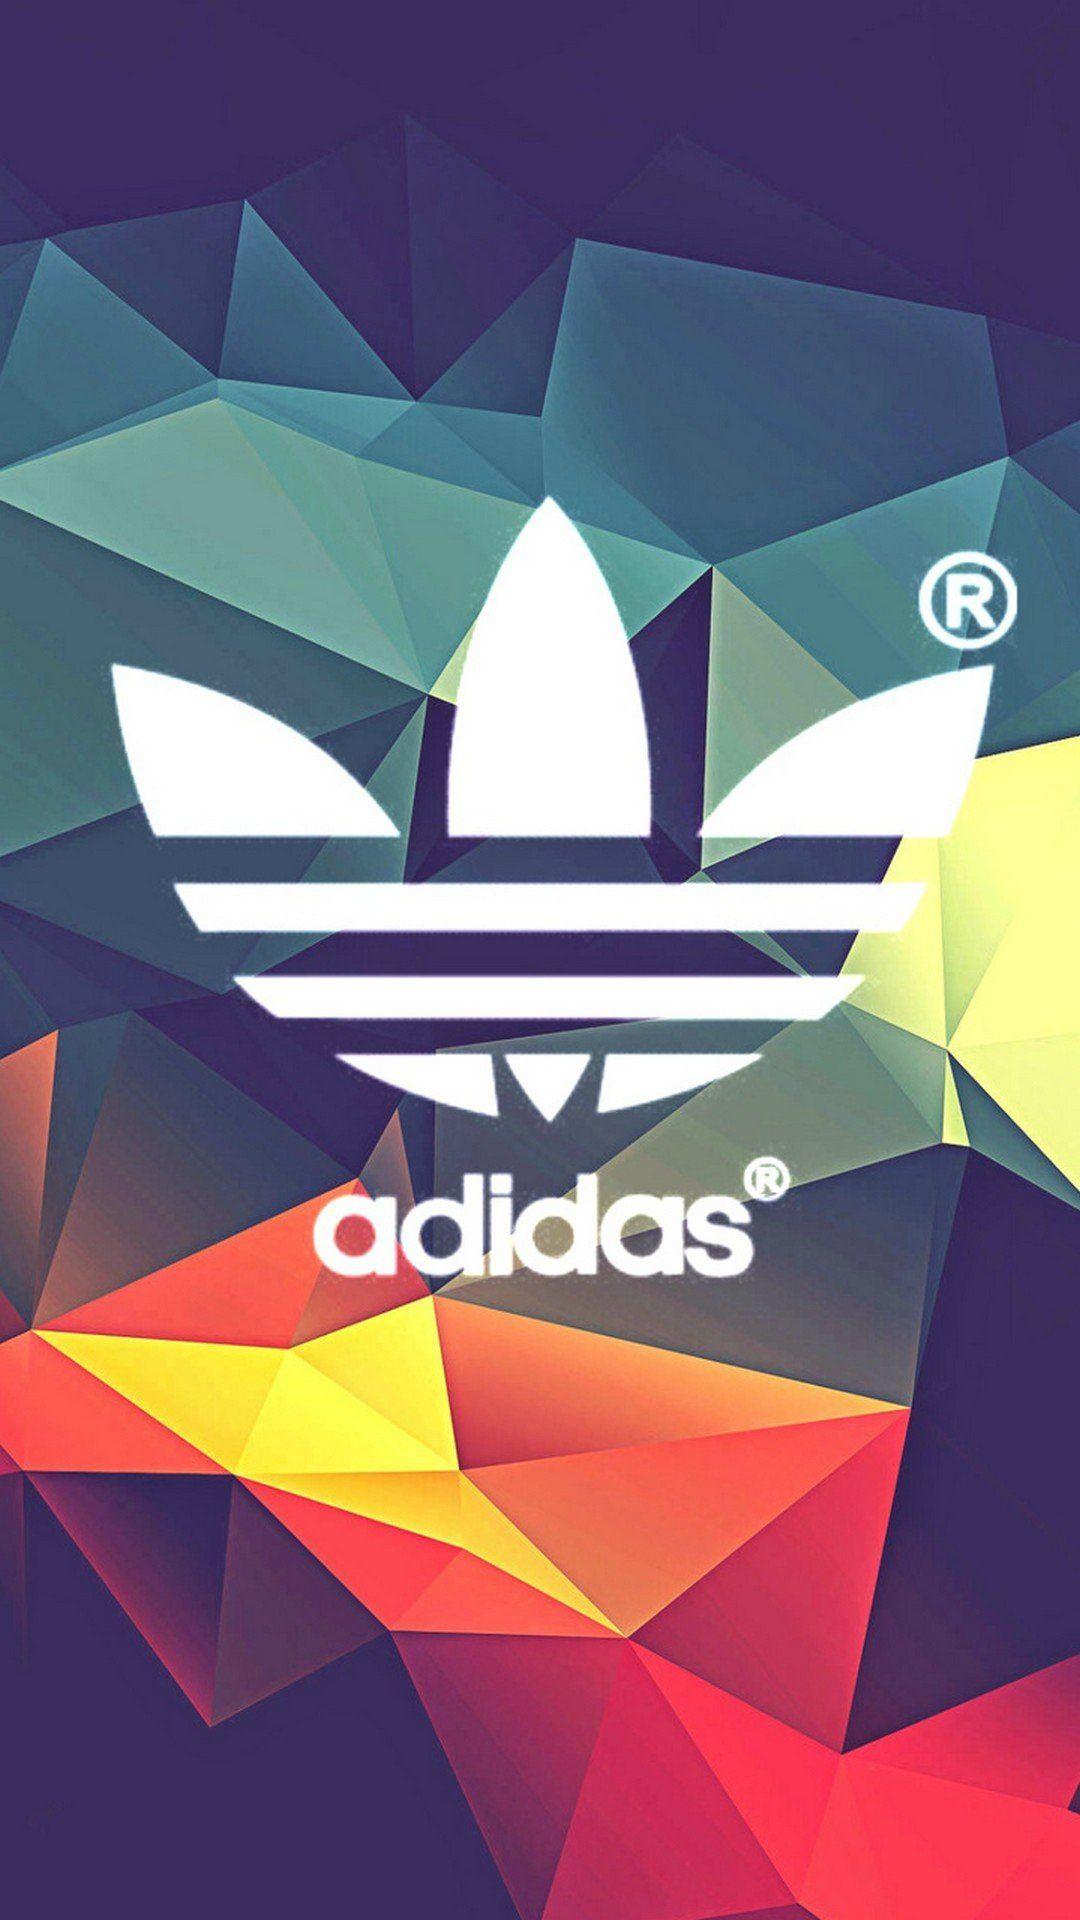 Adidas - Free Android Backgrounds - WallpaperAccess